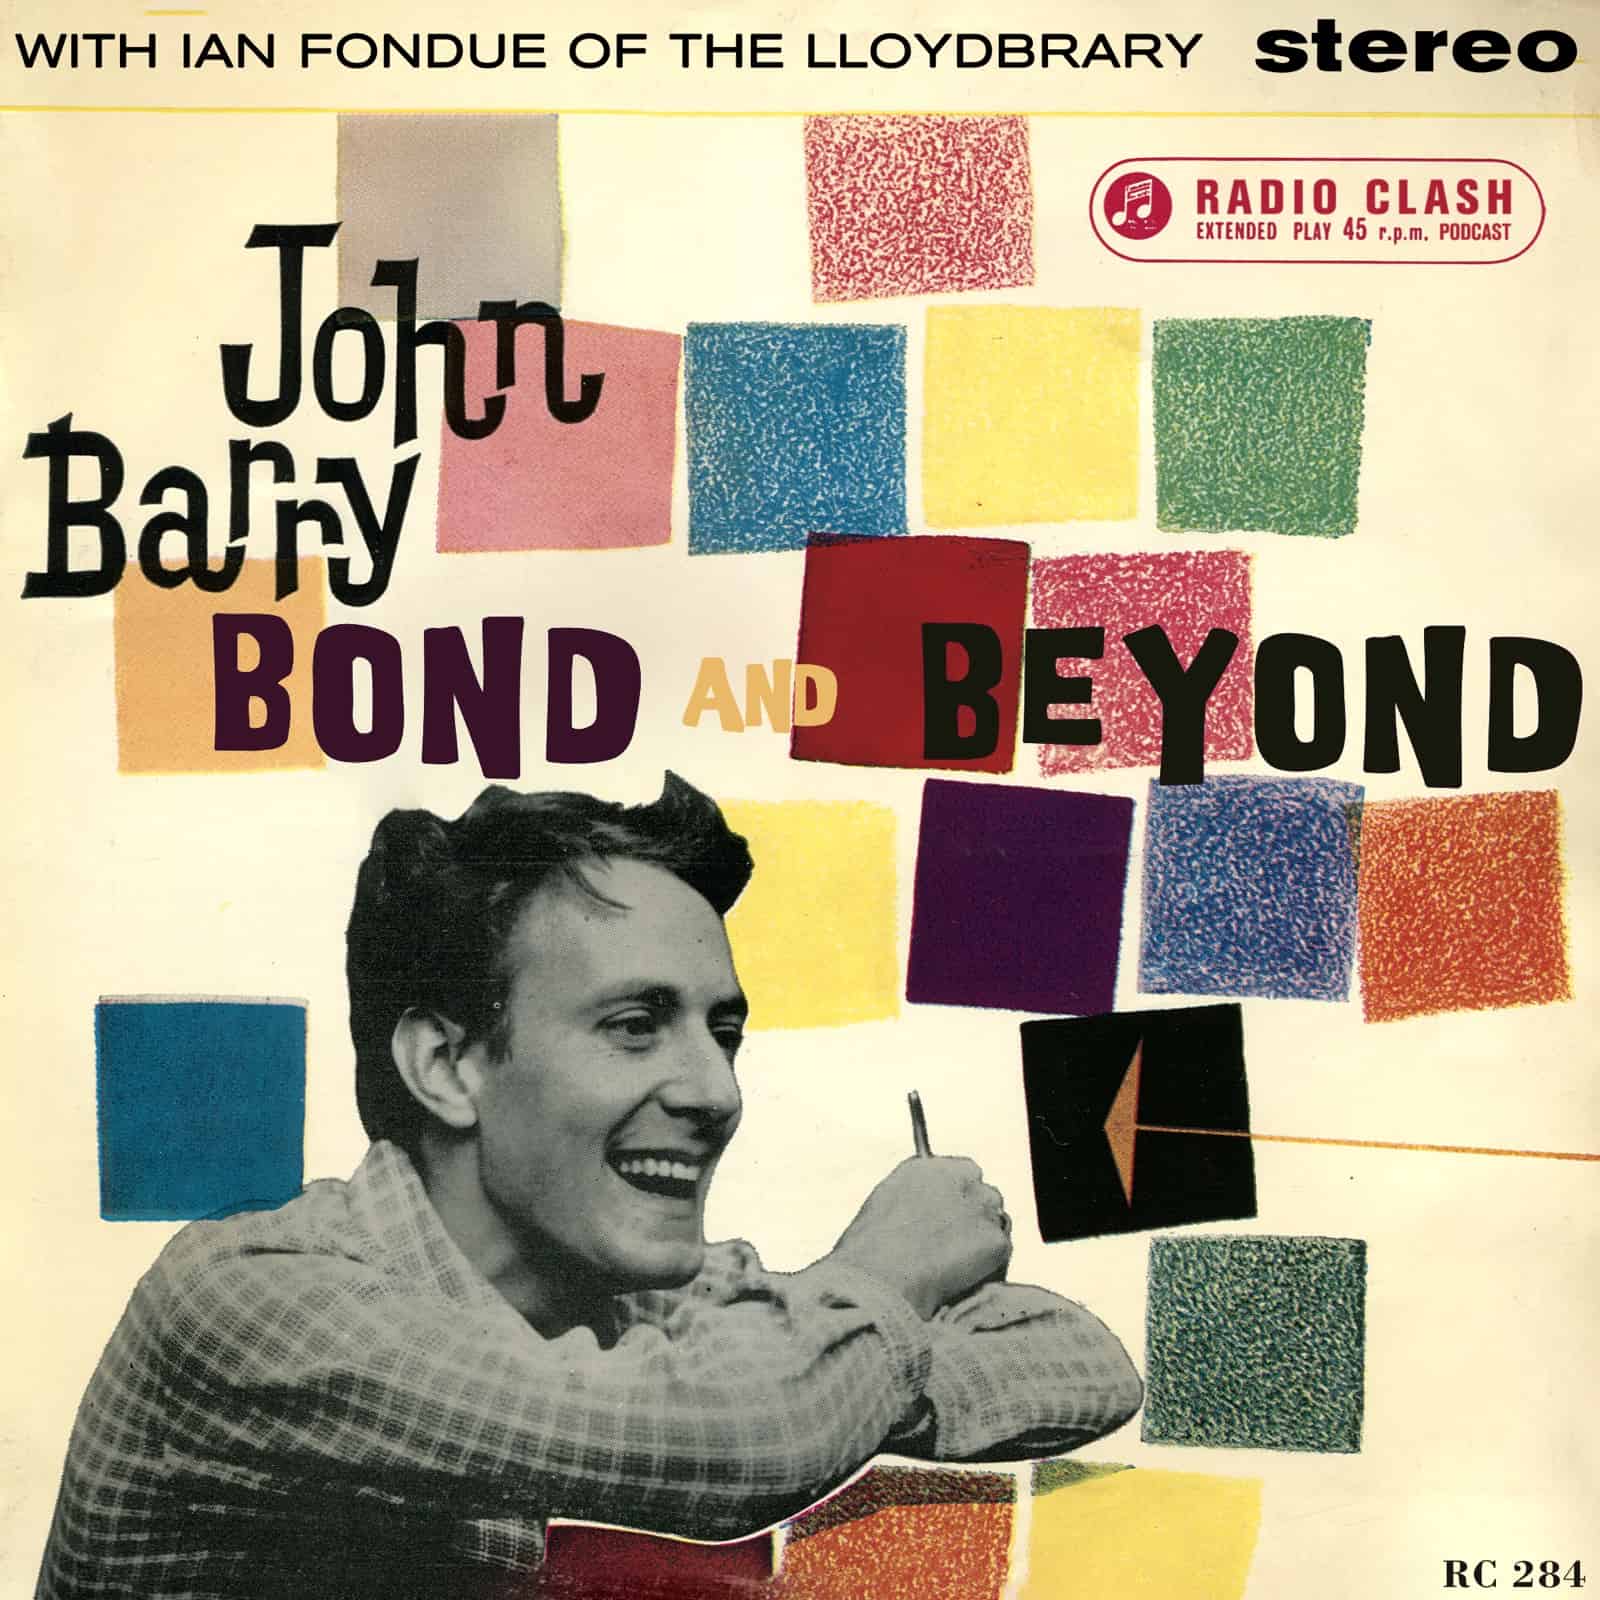 RC 284: John Barry – Bond and the Great Beyond